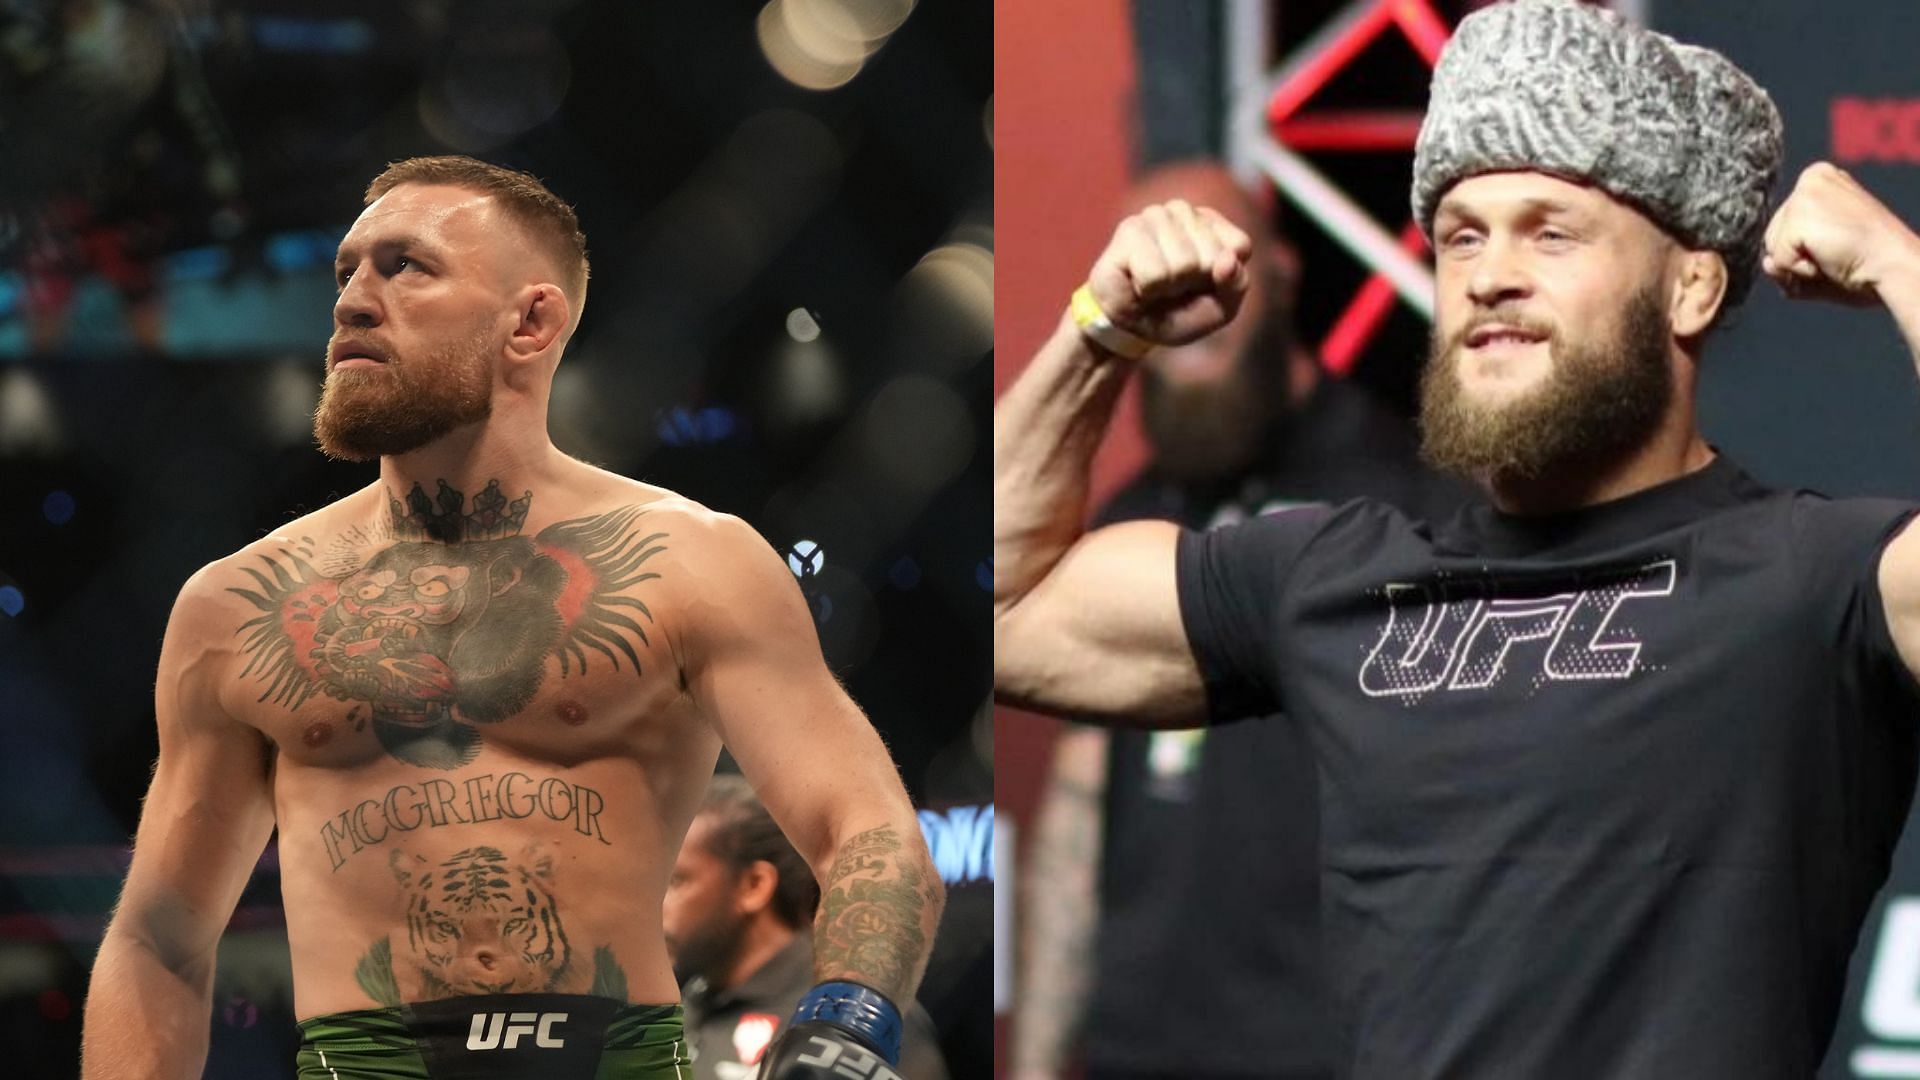 McGregor (L) had some words for Rafael Fiziev (R) ahead of his fight against Rafael dos Anjos